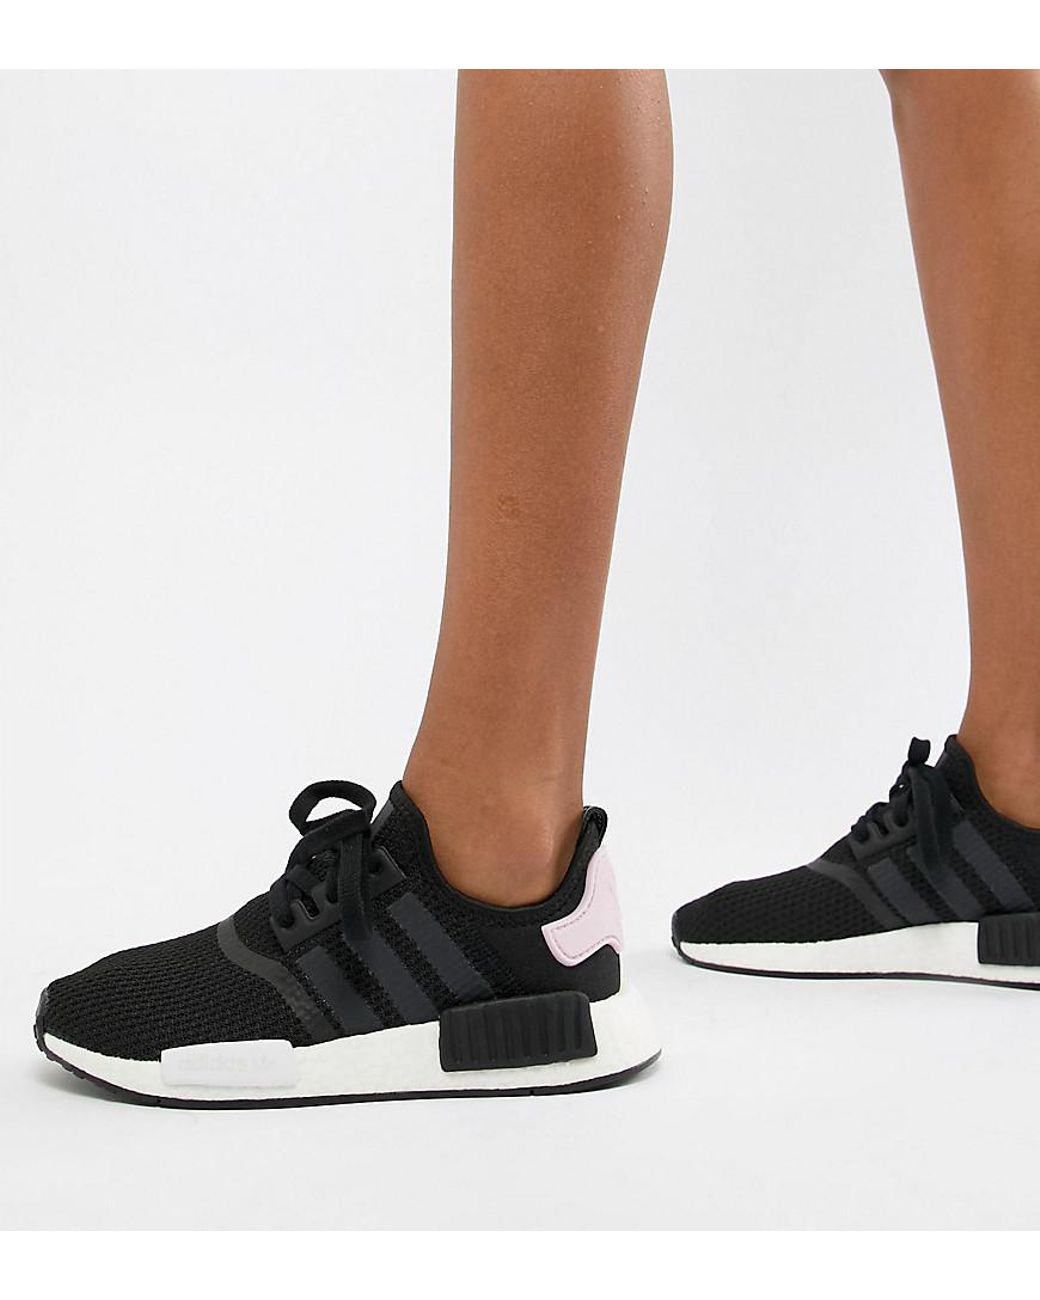 adidas Originals Nmd Sneakers In Black And |